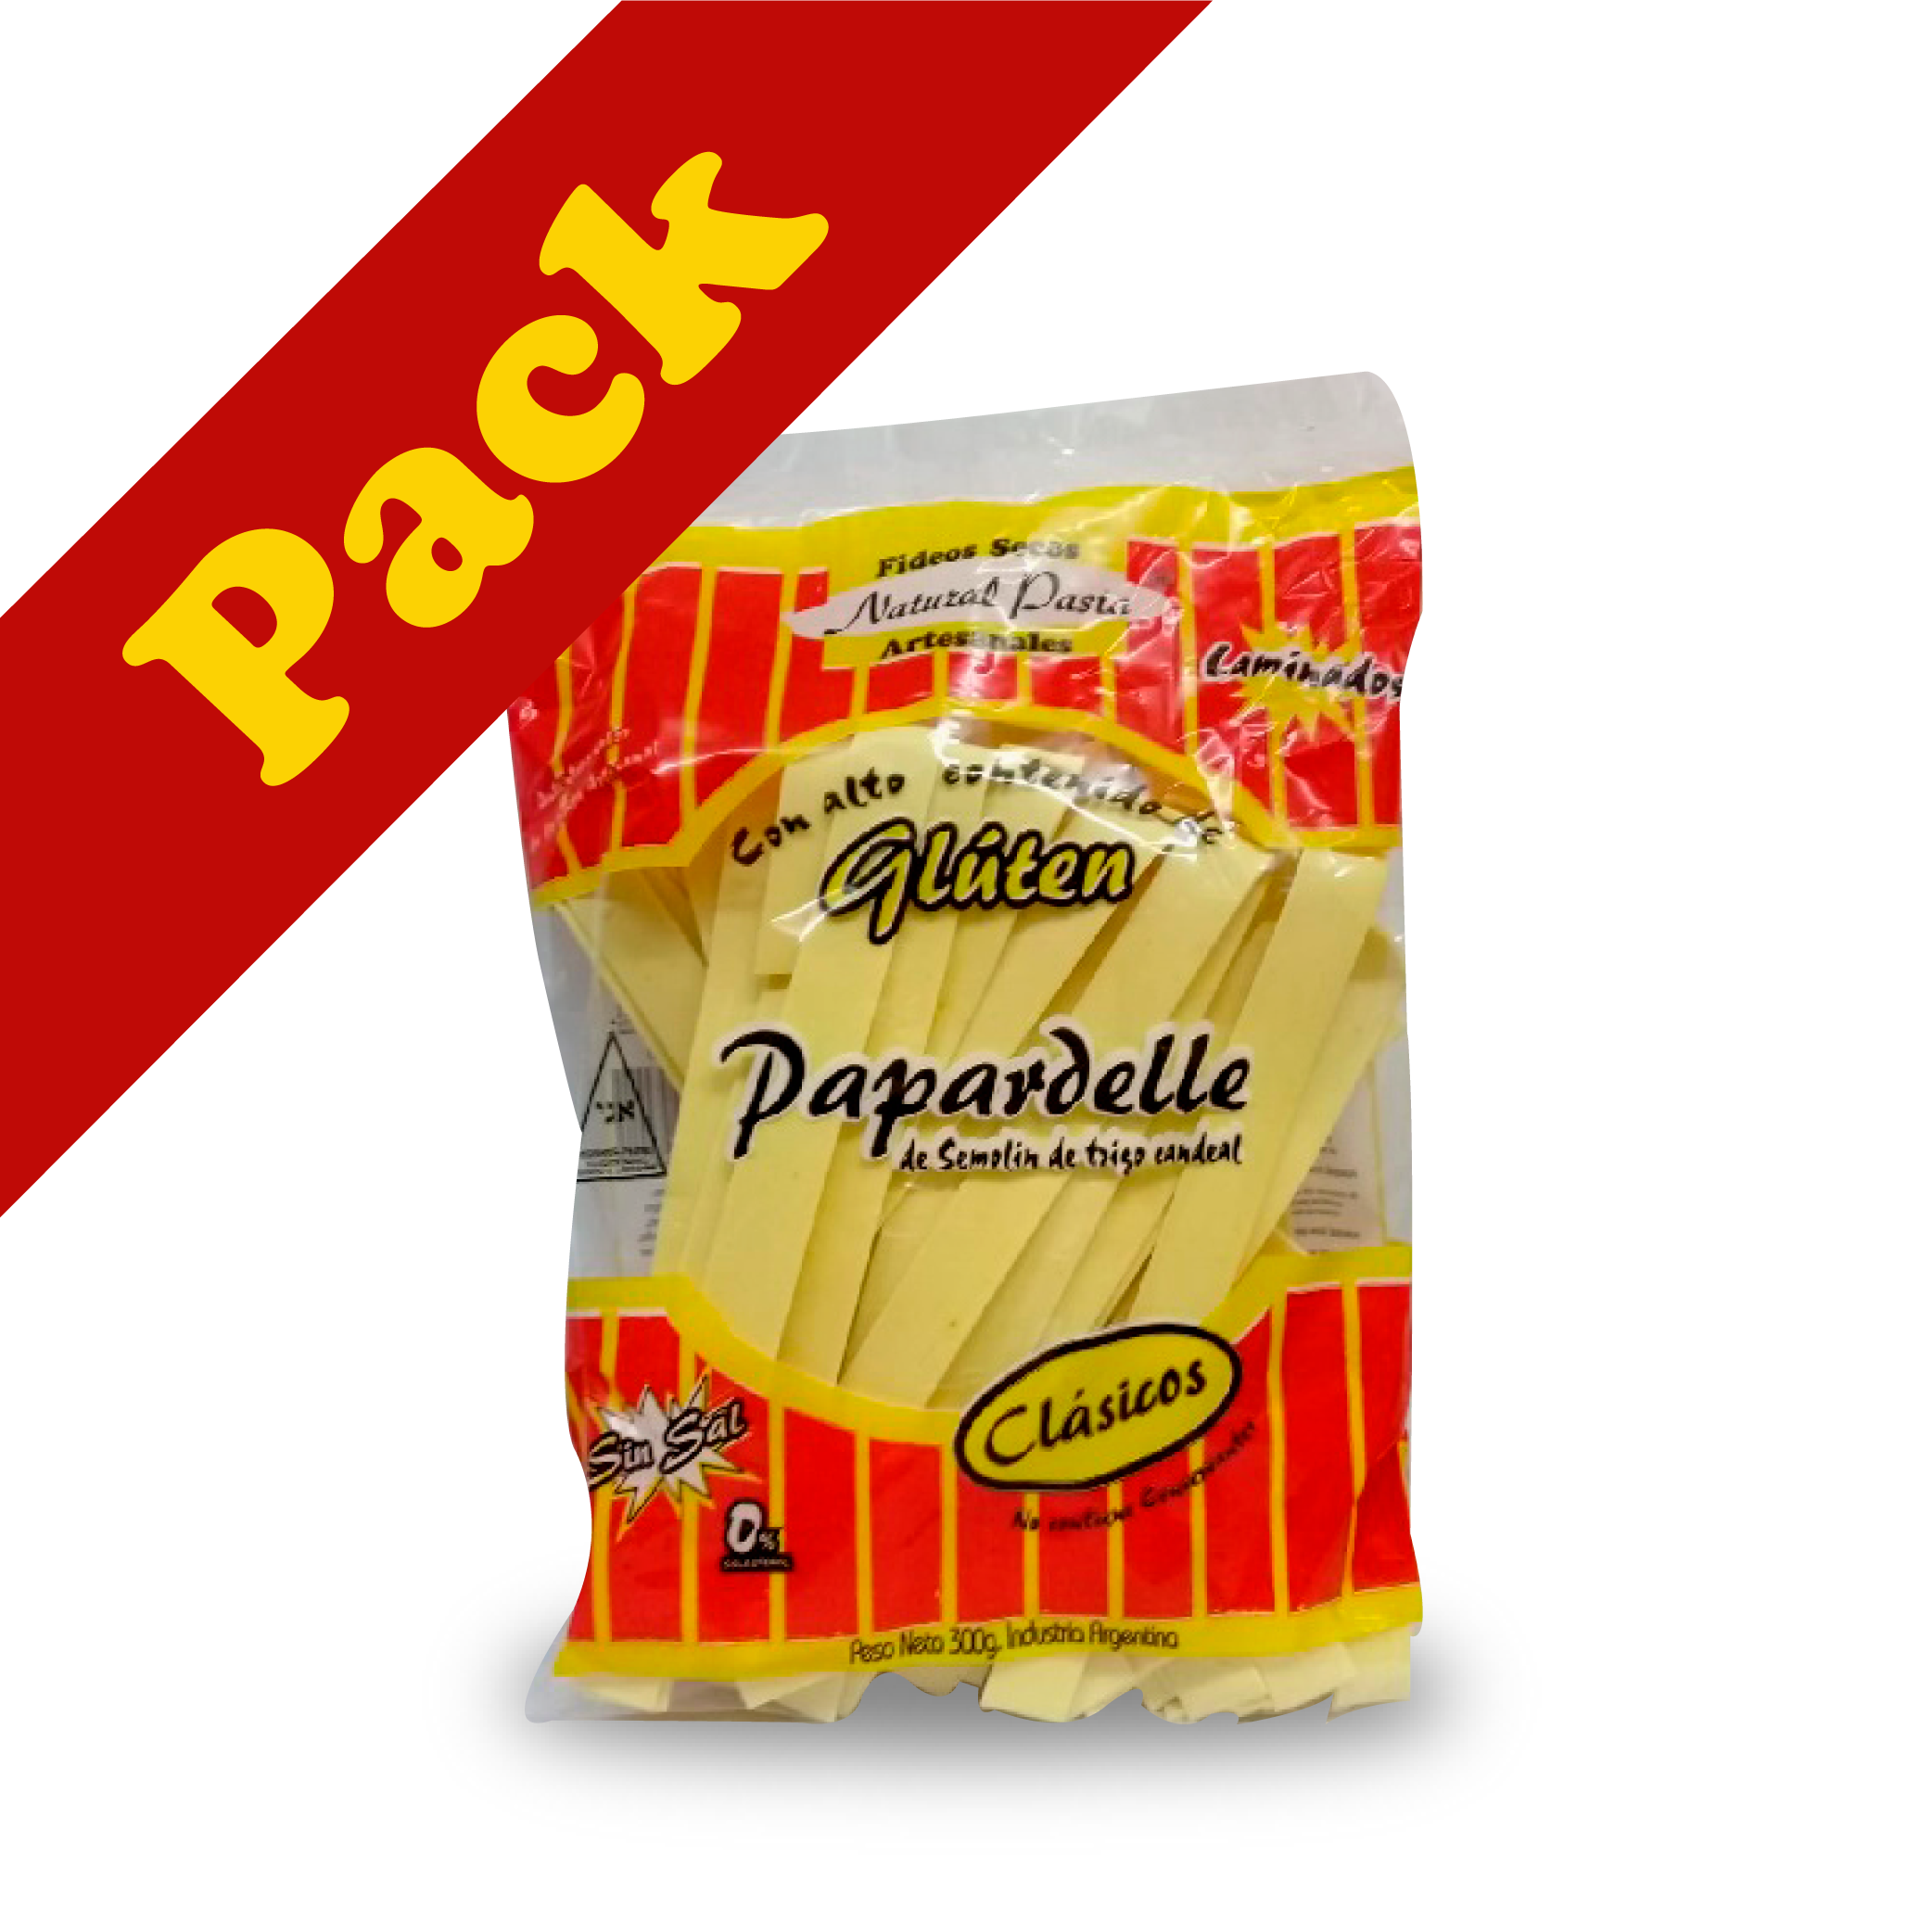 NATURAL PASTA - Papardelle NATURAL PACK 12 x 300 grs